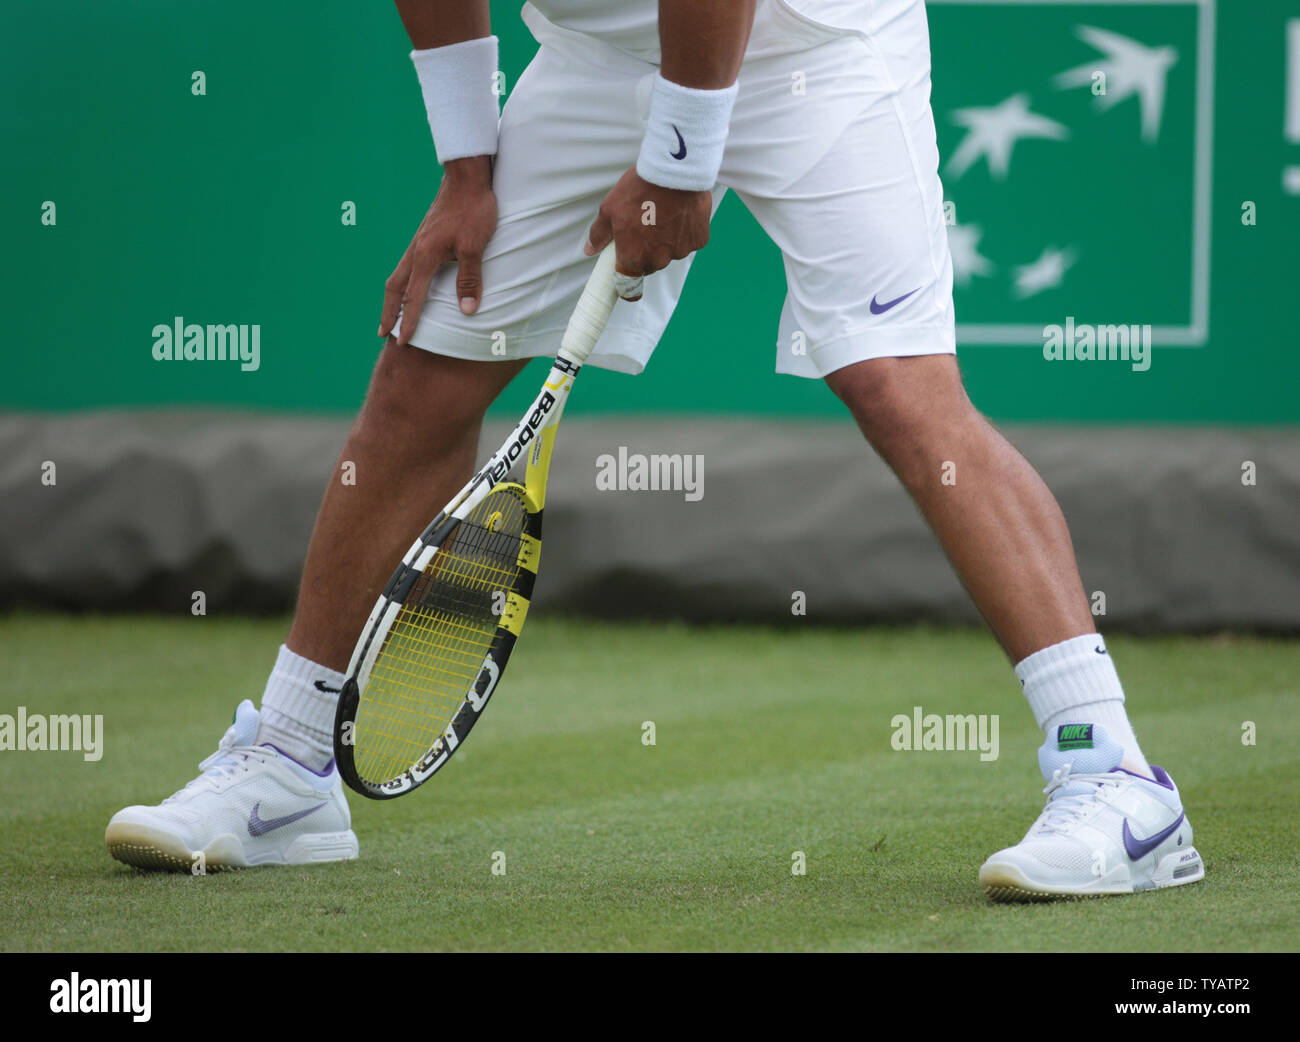 A close up of World No.1 tennis player Rafael Nadal's injured Knees during  the final of the BNP Paribas Tennis final against Stanislas Wawrinka at the  Hurlingham Club,London Friday June 15 2009.